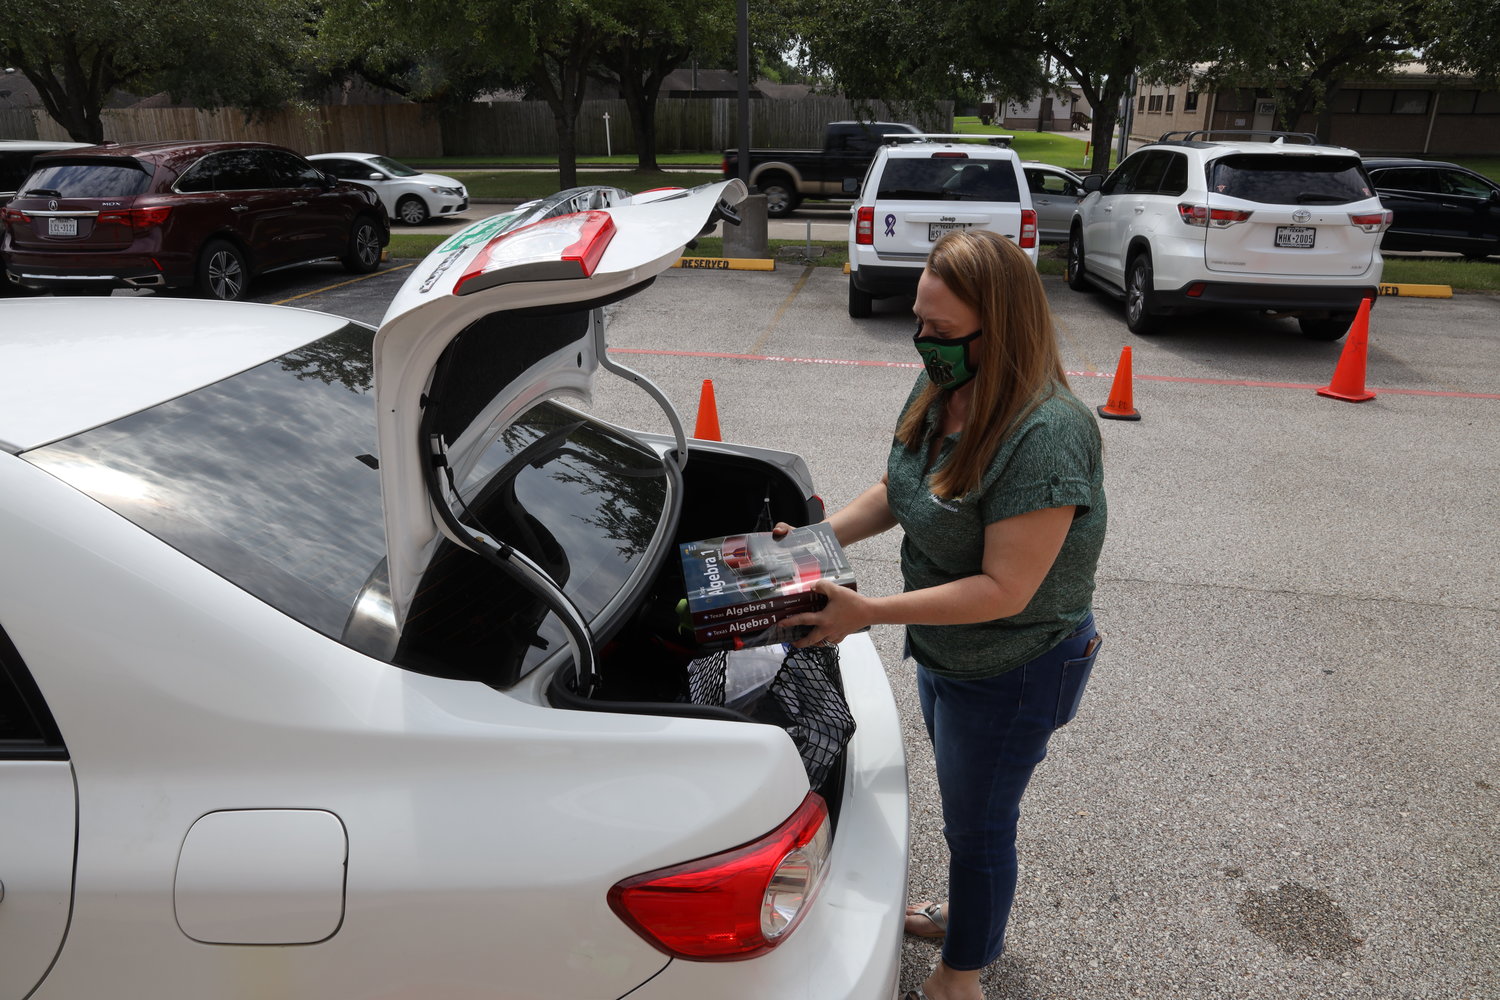 Device pickups were no contact to ensure the safety of the volunteers and families. Distributors would put the devices and hotspots in the trunk of the car, and then talk to the parents on how to use them.